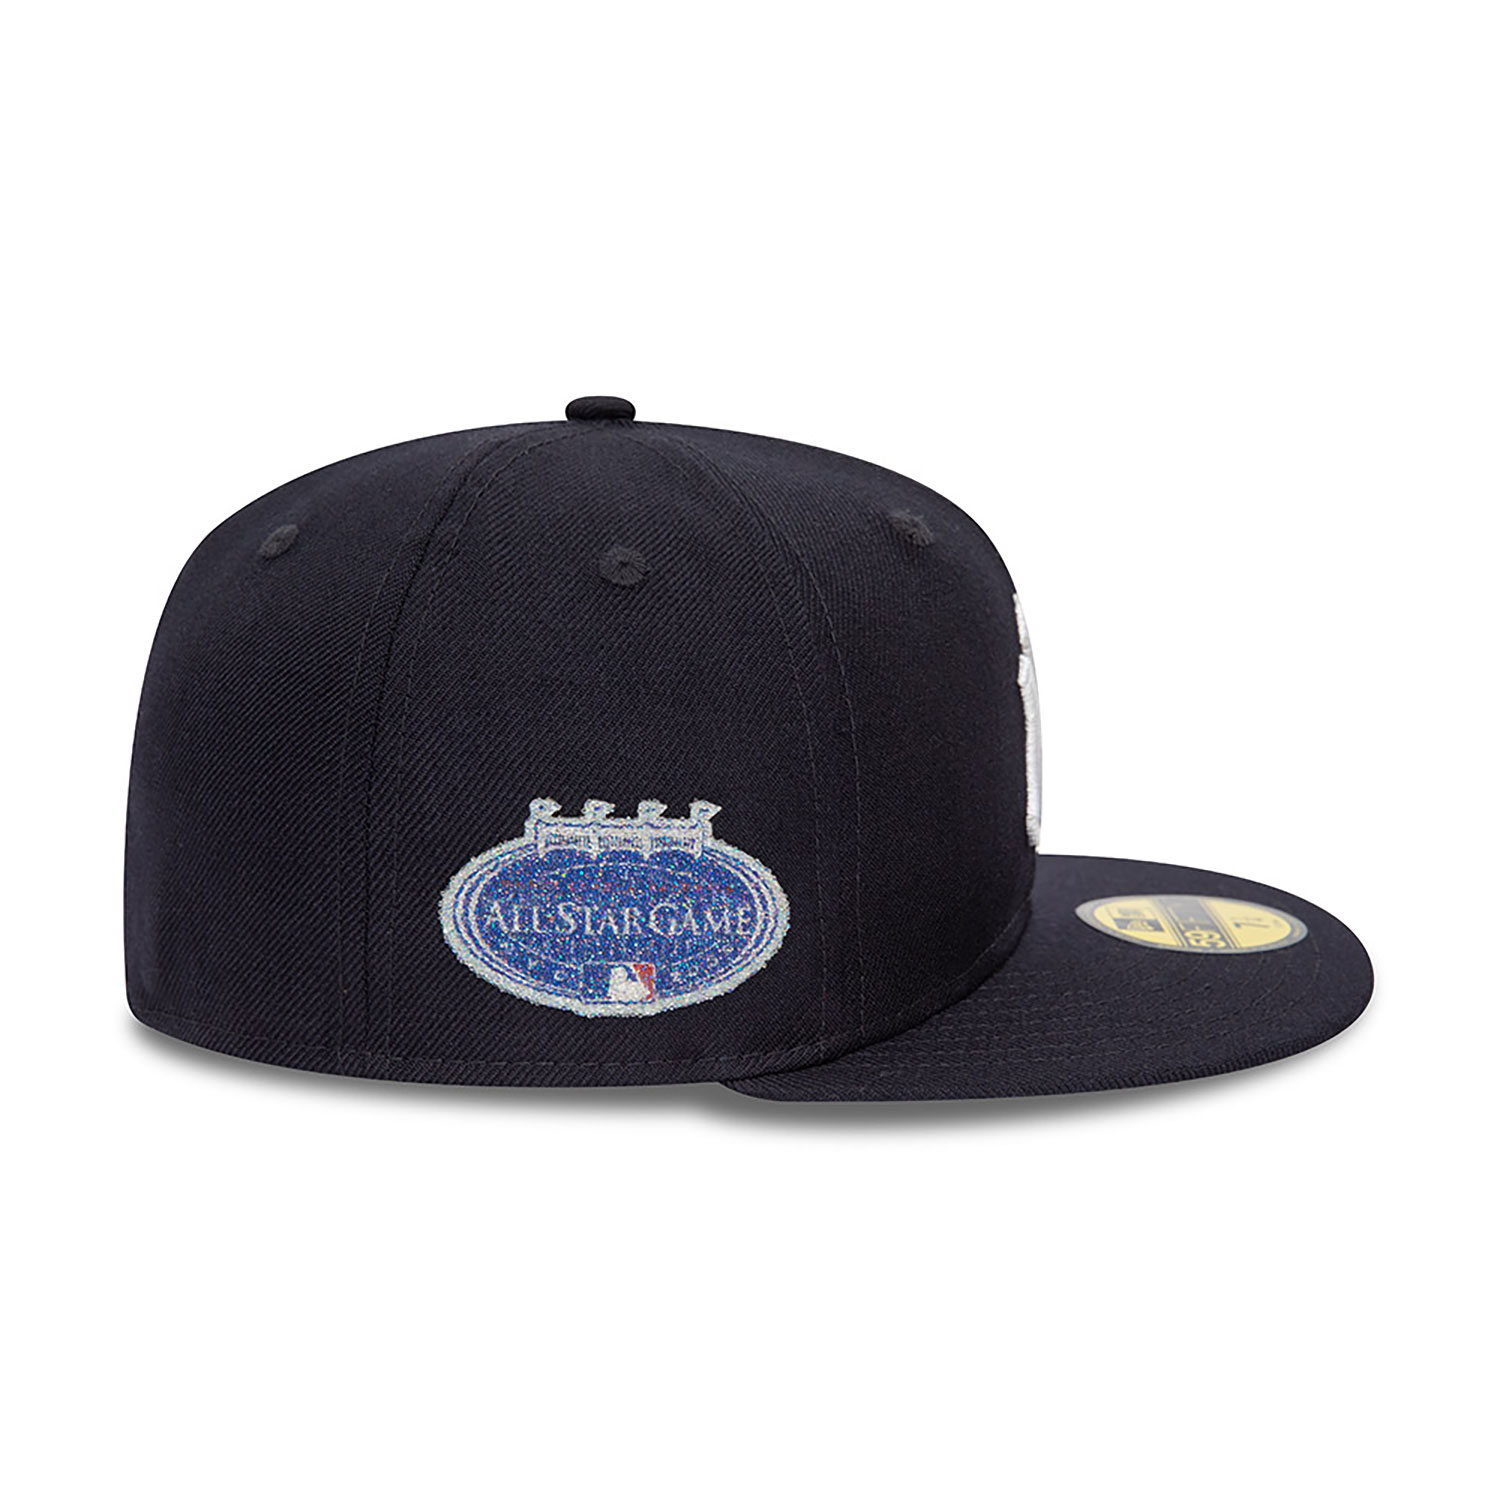 New York Yankees MLB Icy Patch Navy 59FIFTY Fitted Cap